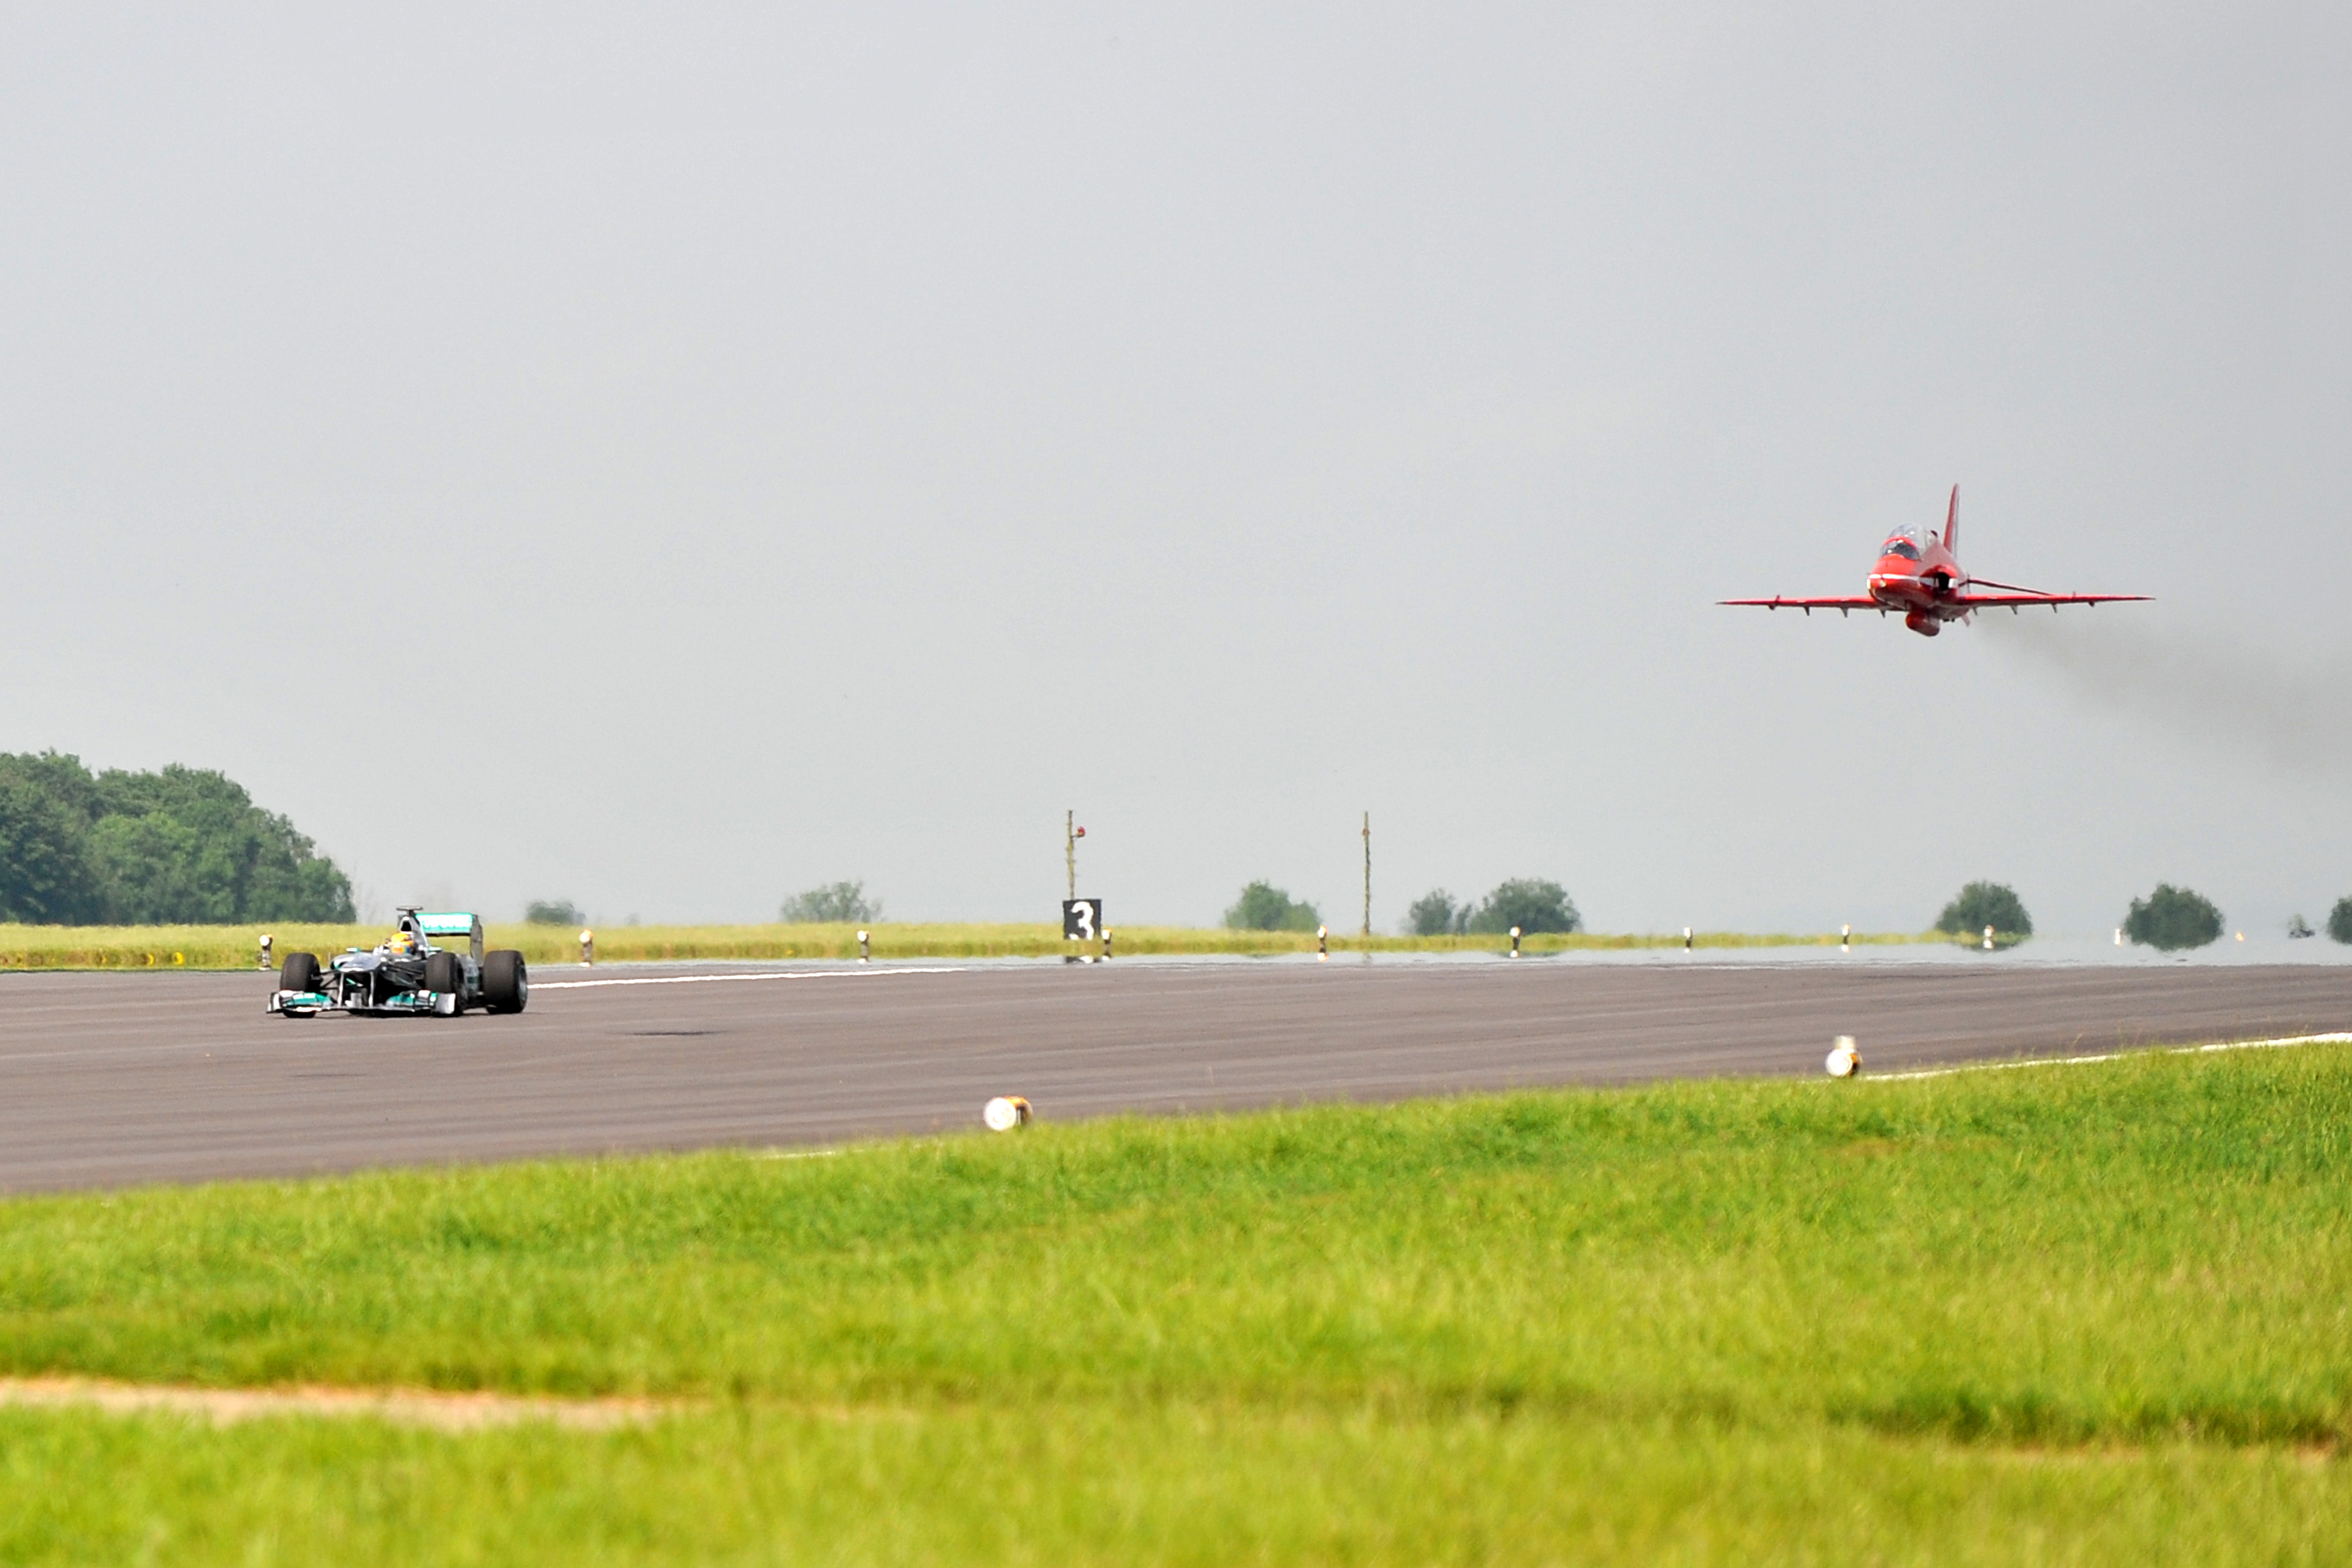 Lewis Hamilton drives his F1 car along the runway, with a Red Arrows jet overhead at RAF Scampton in 2013.